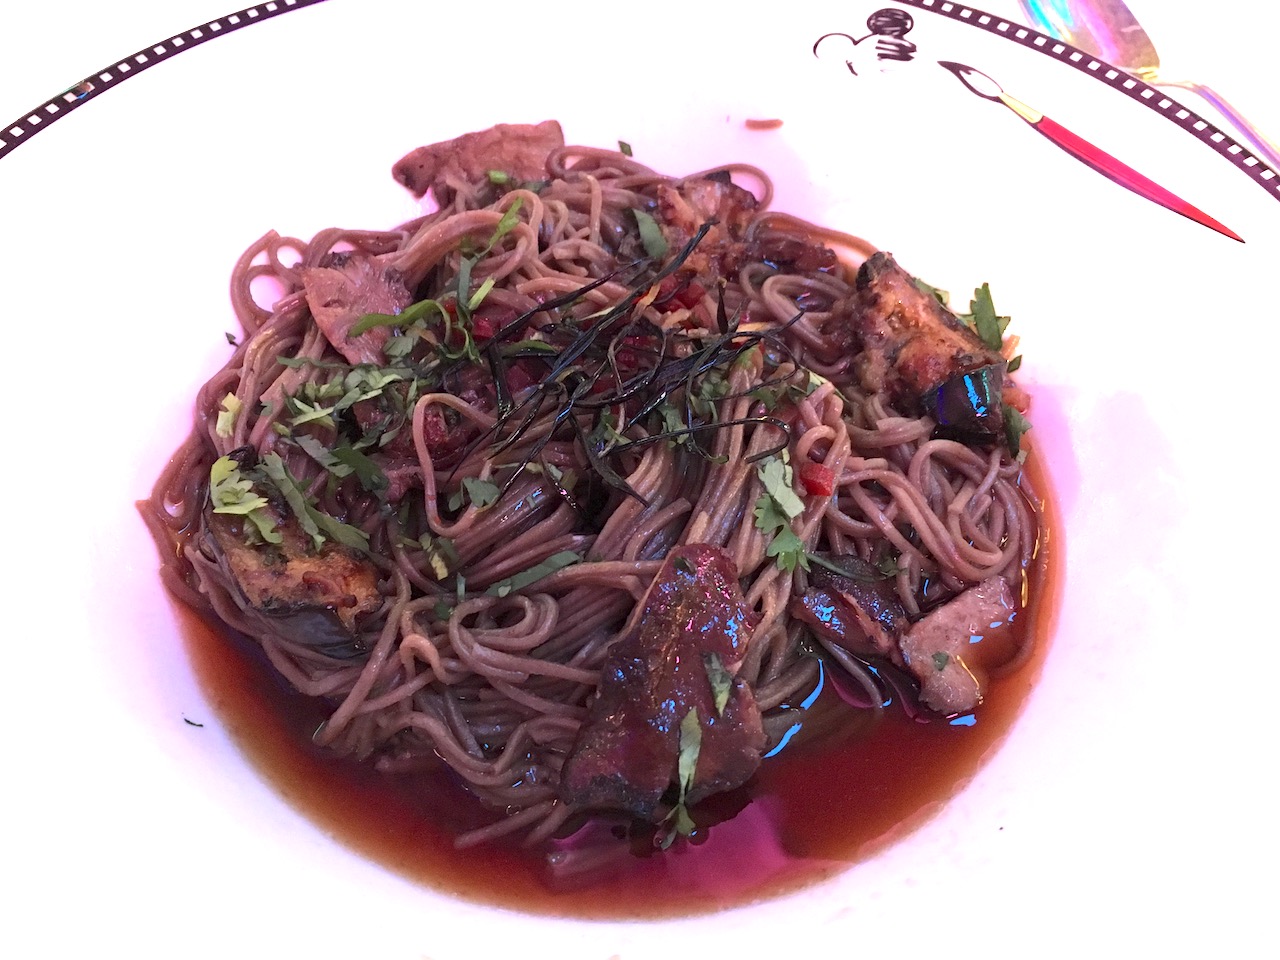 Gingered Soba Noodles with Eggplant and Shiitake Mushroom on board the Disney Magic is one of the best dishes on board and totally vegetarian